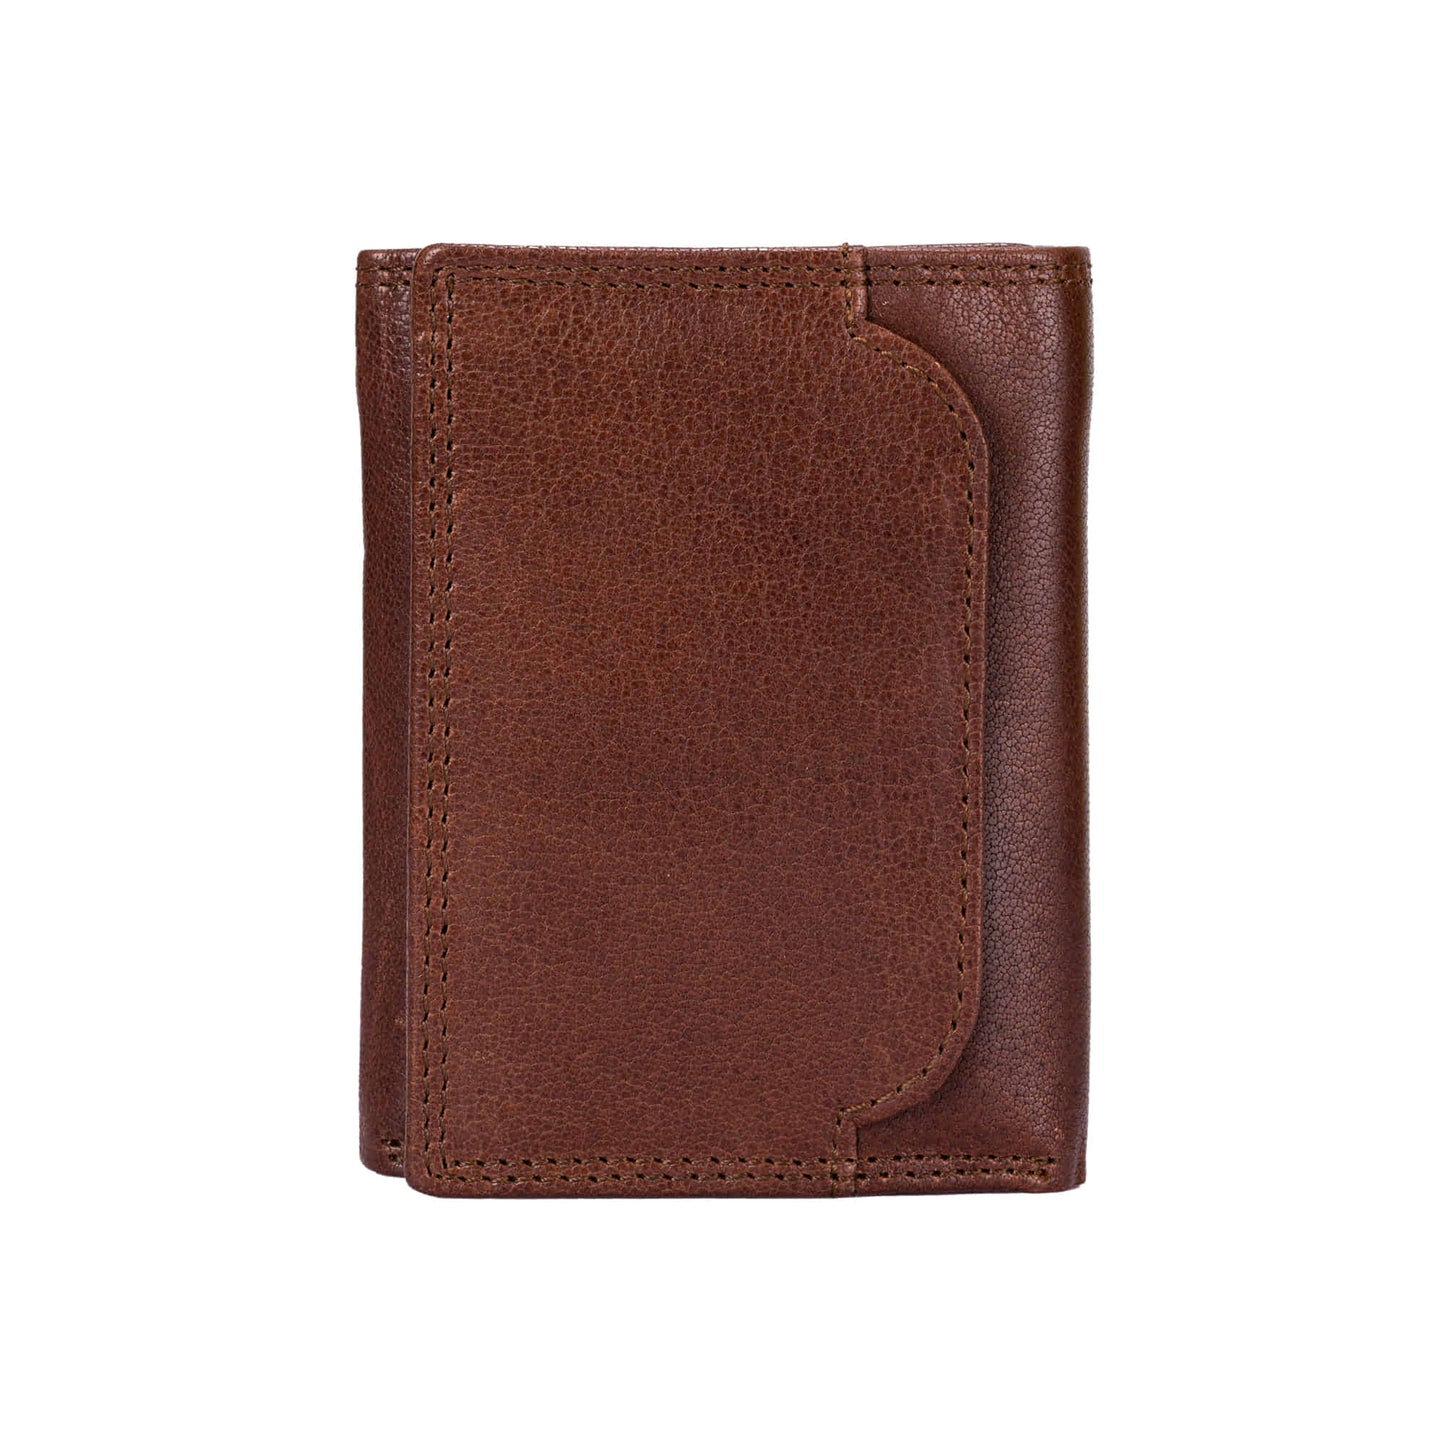 Style n Craft 301791 Trifold Wallet in Vintage Full Grain Leather - brown color - front closed view  showing the outside pocket